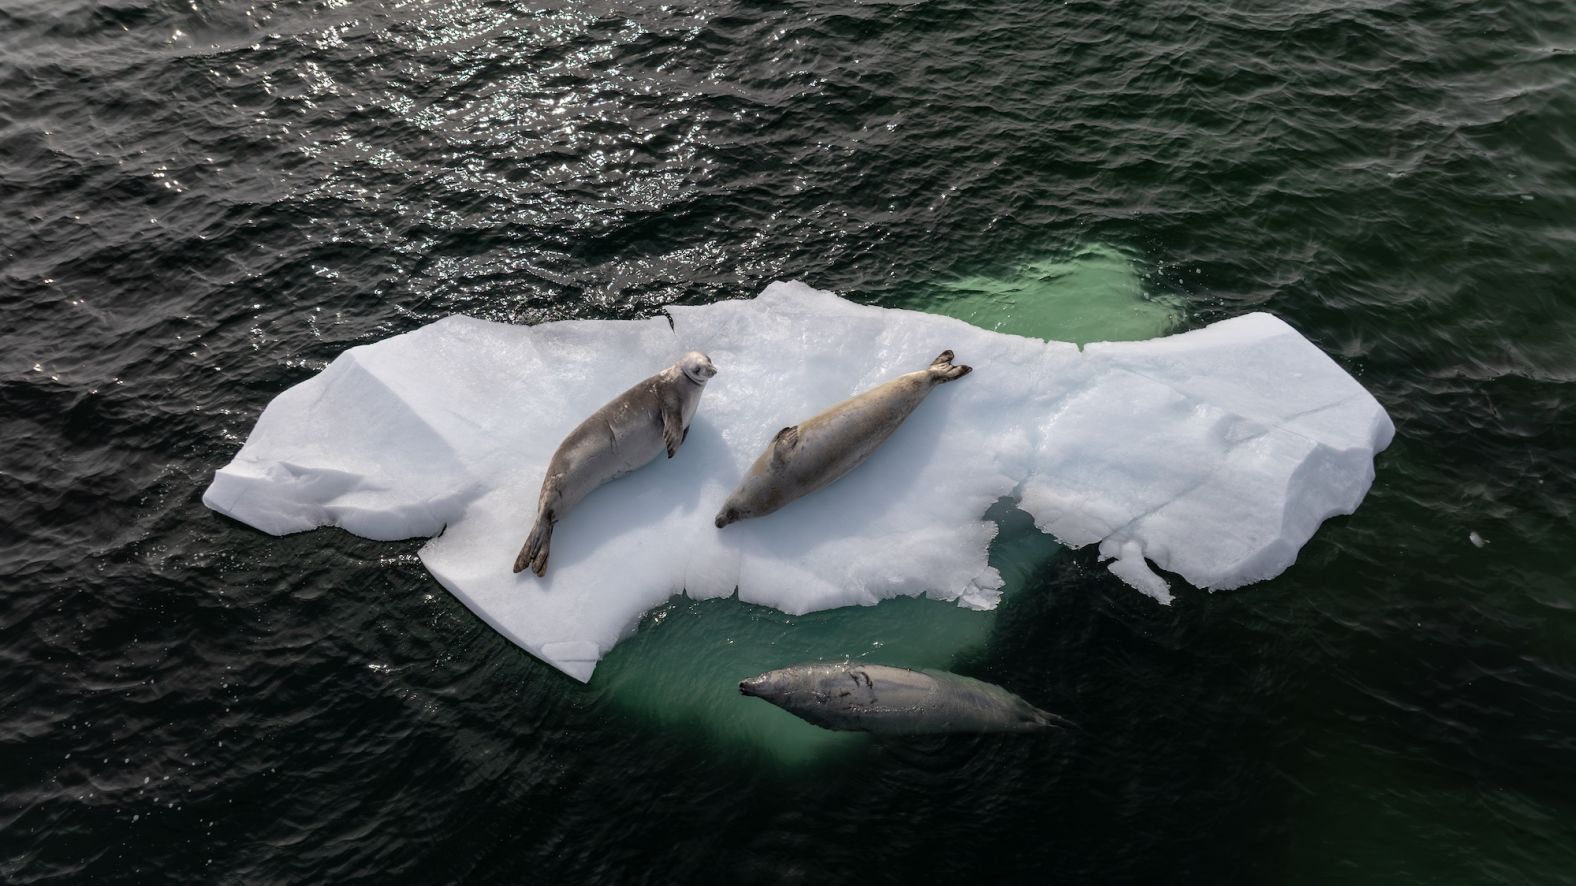 Seals rest on an ice mass in Antarctica on Thursday, April 11.